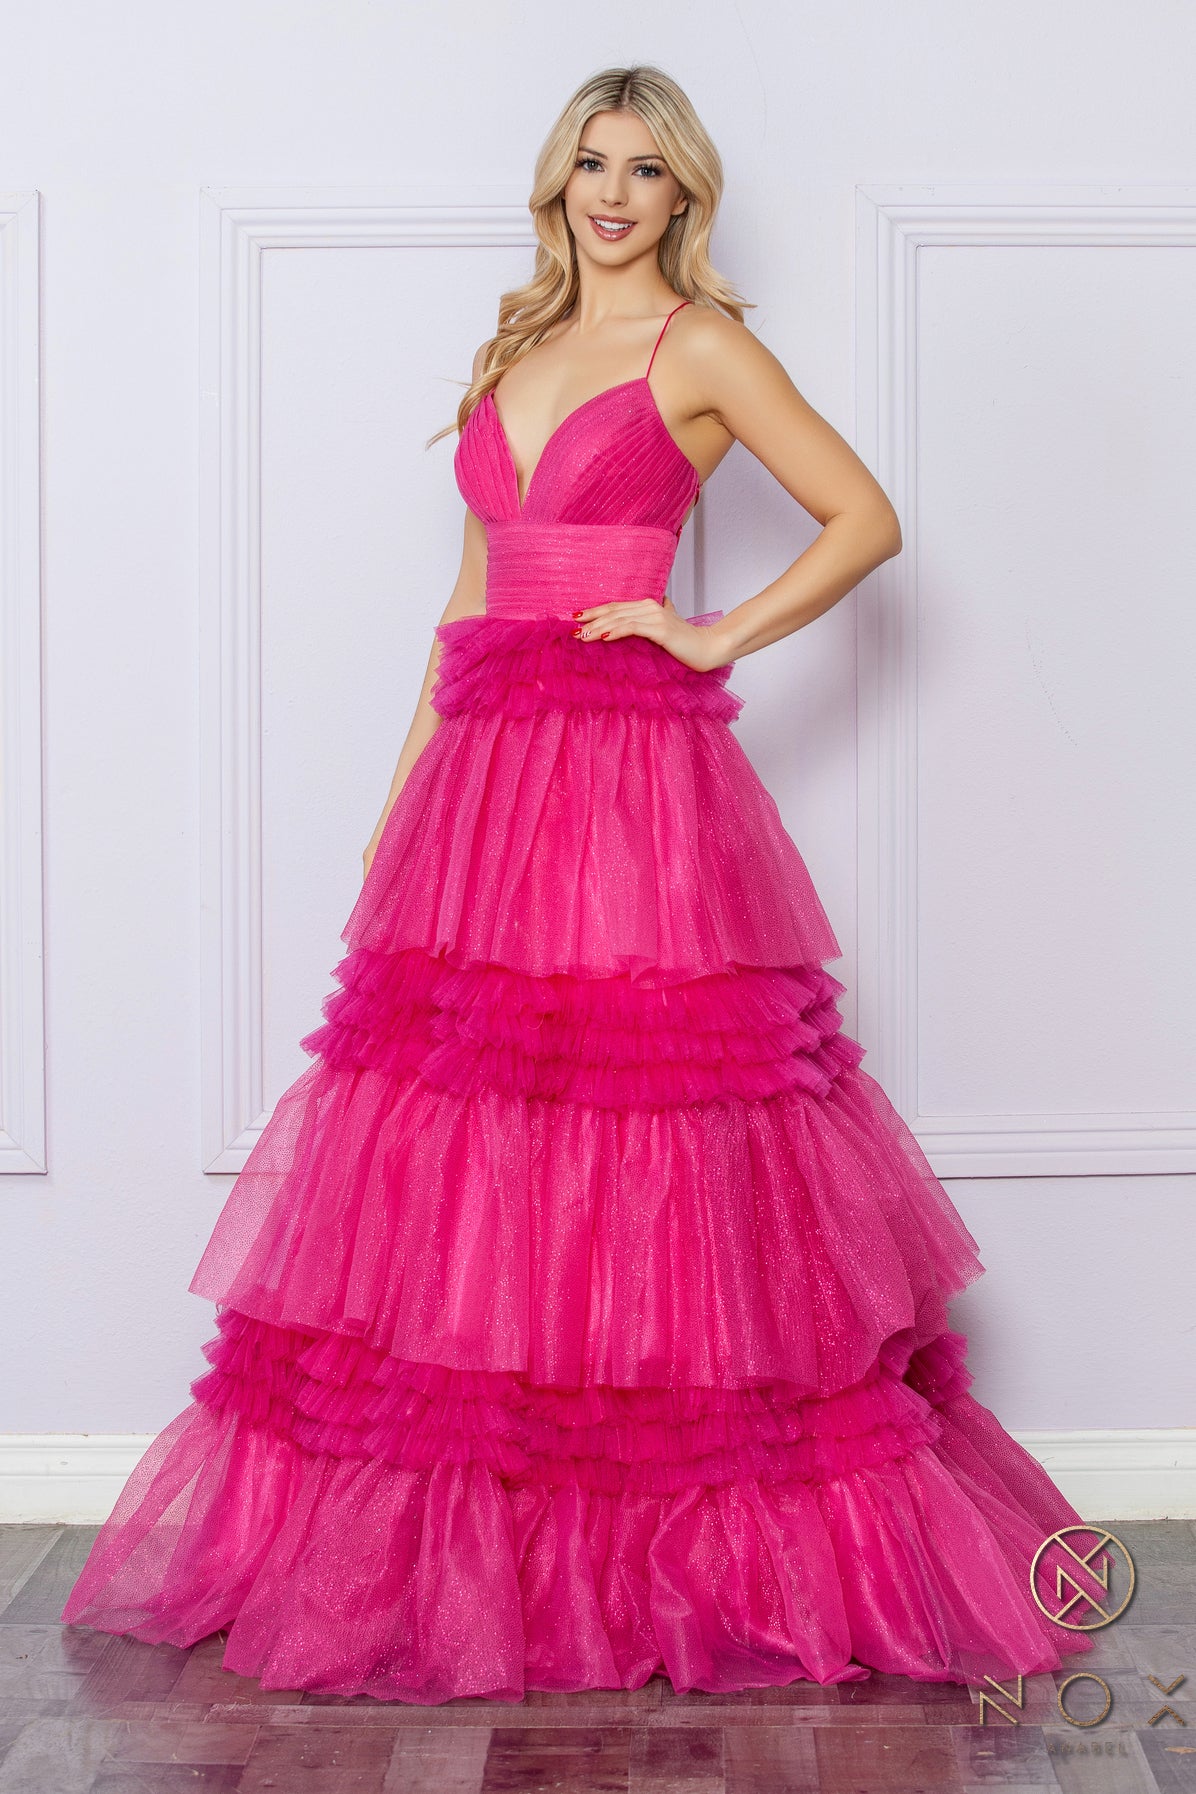 Nox Anabel -R1316 Sleeveless Layered Tulle Prom Gown